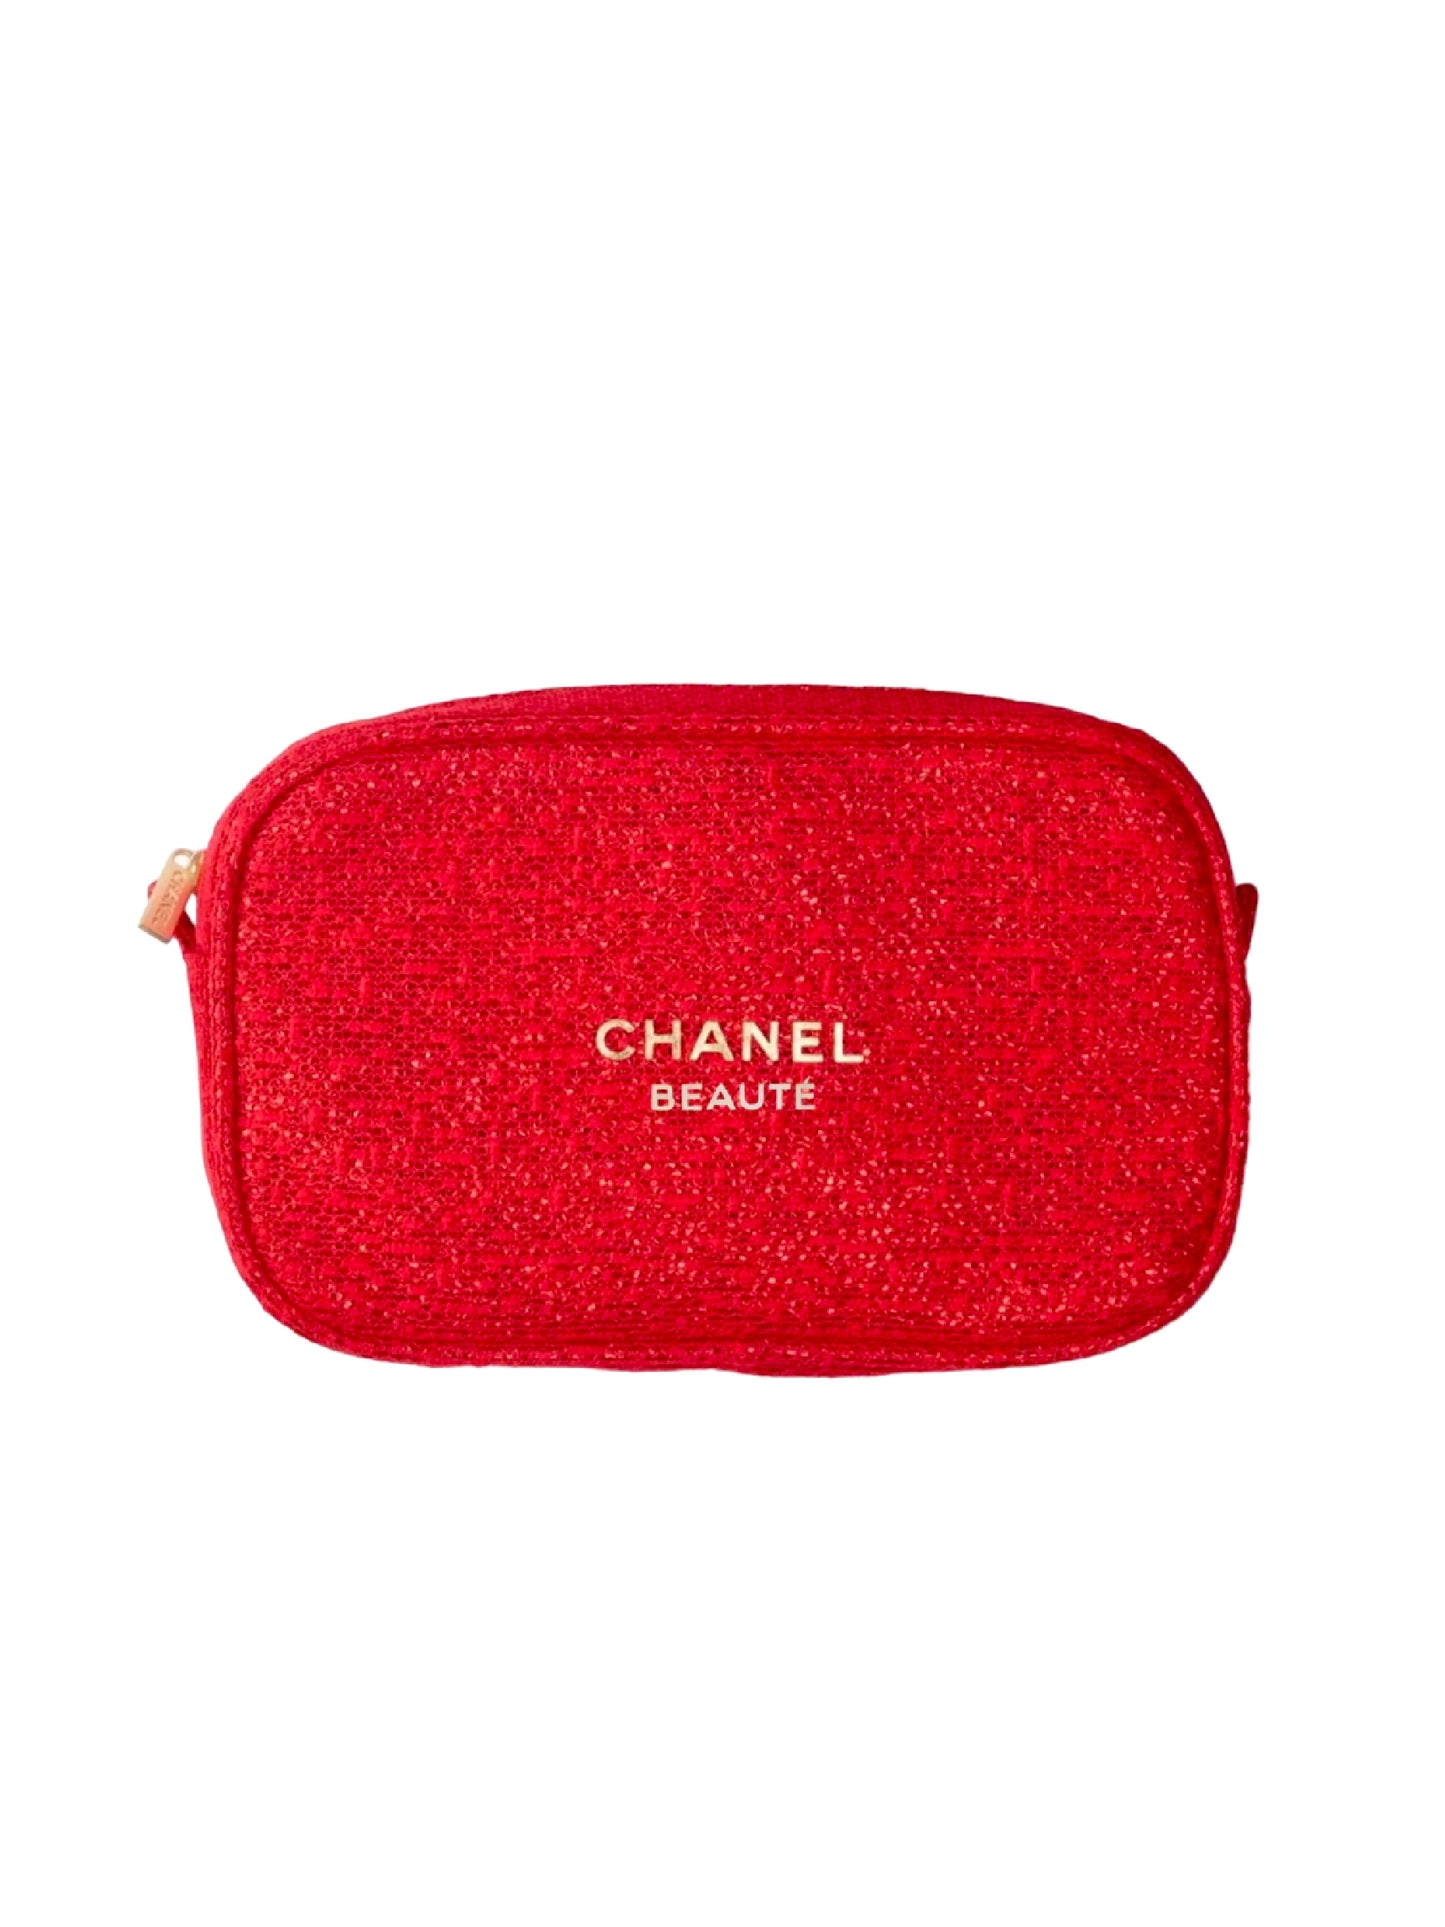 Chanel Beauty Red Bag